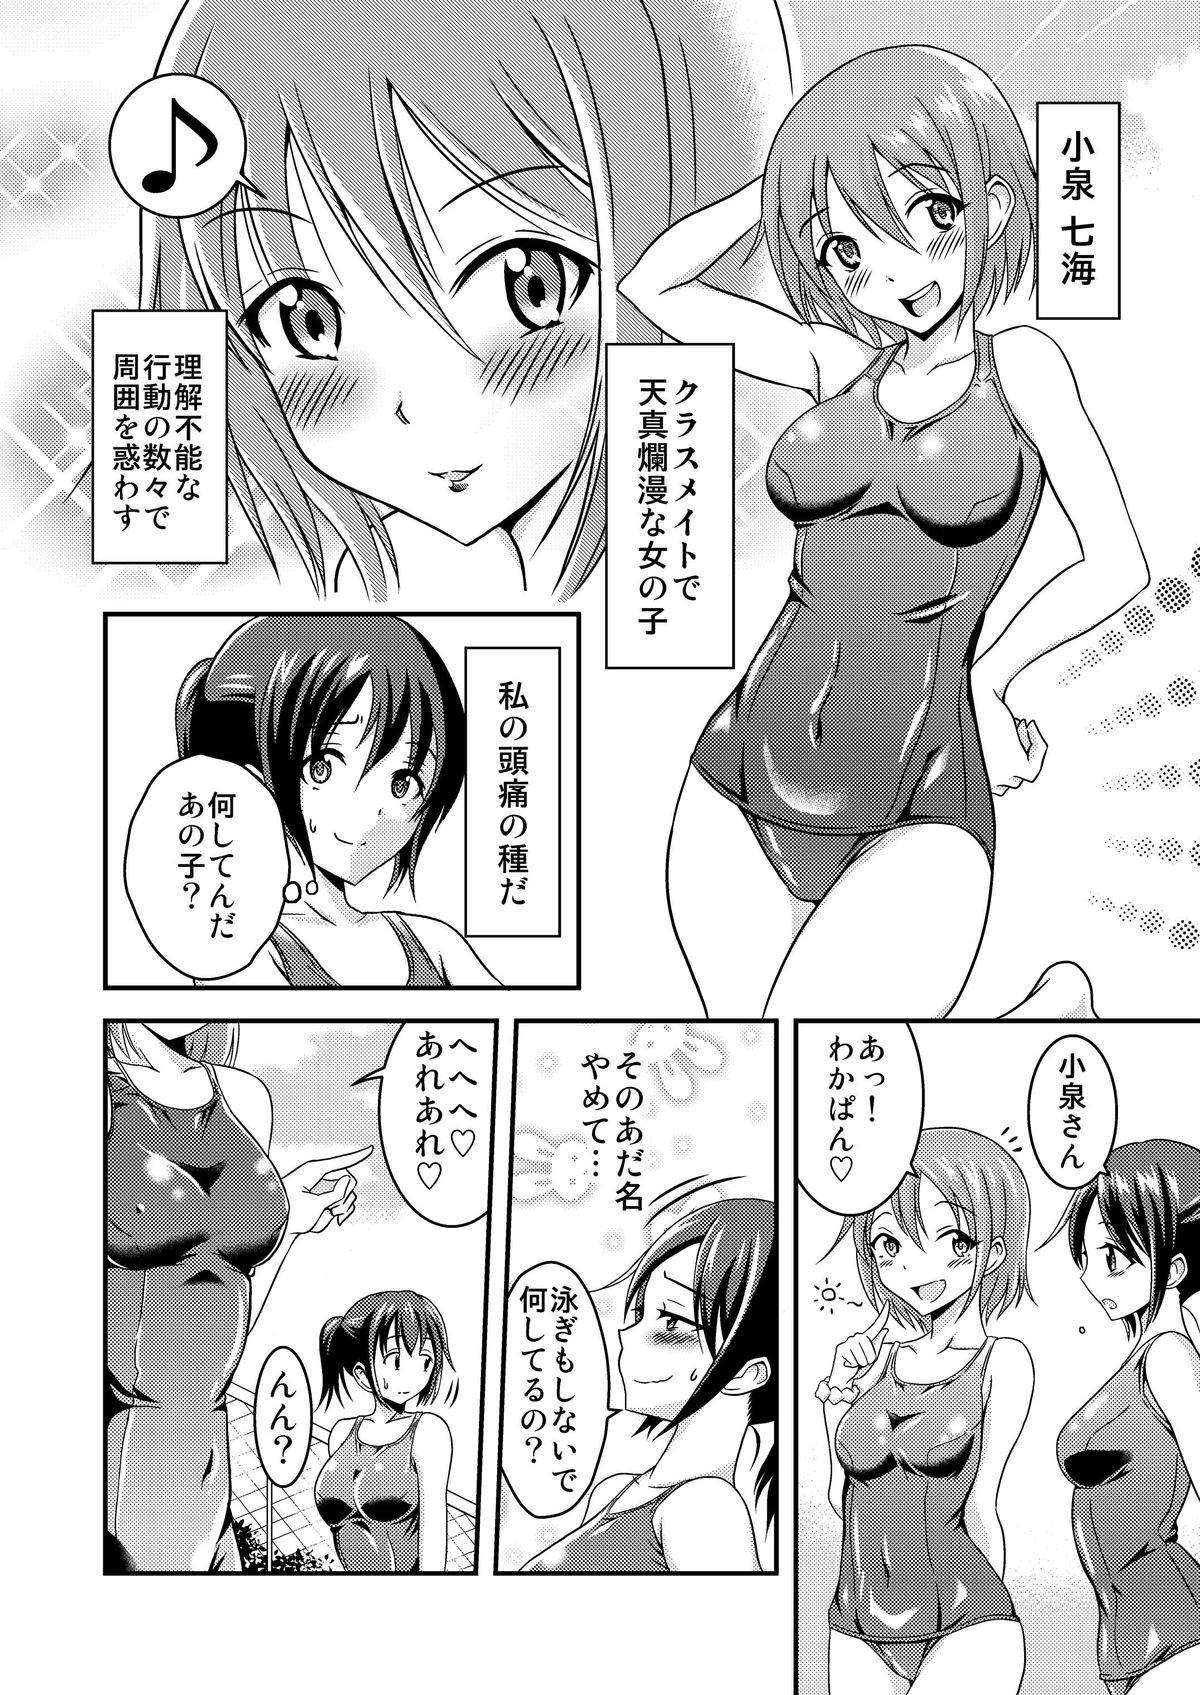 Seduction Hentai Roshutsu Friends - Abnormal Naked Friends Africa - Page 3